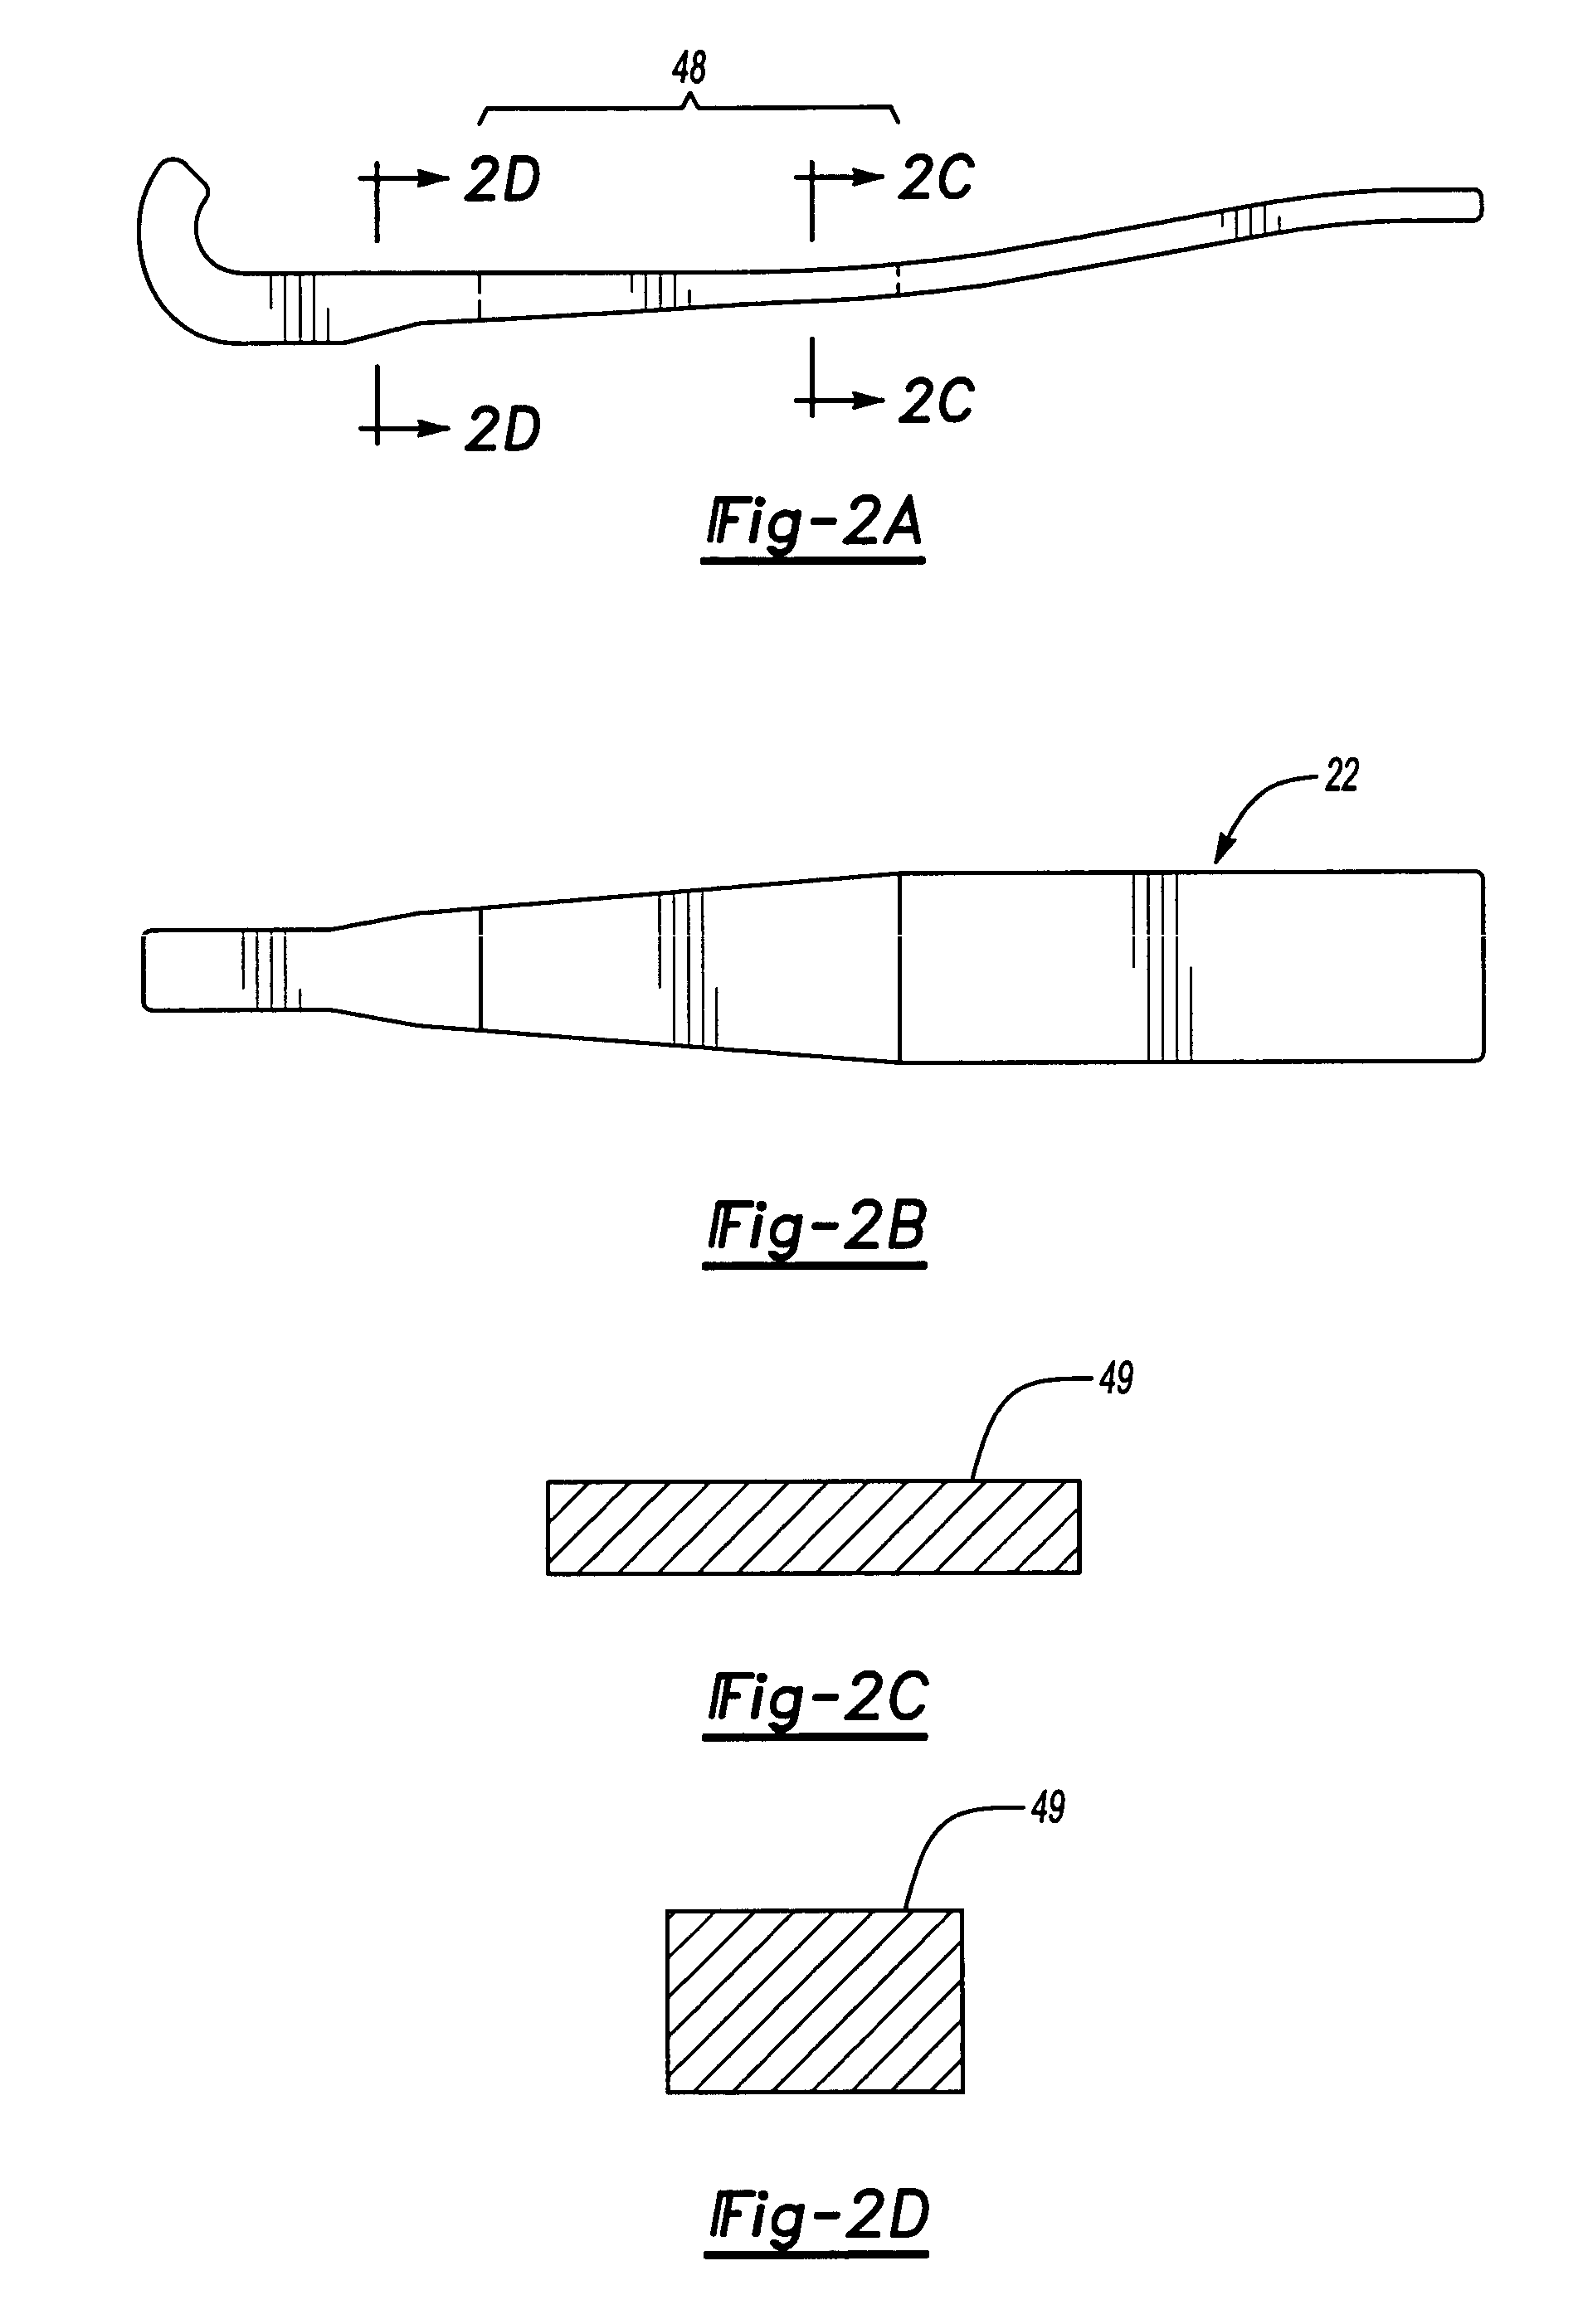 Attachment arrangement for a composite leaf spring which accommodates longitudinal movement through shear displacement